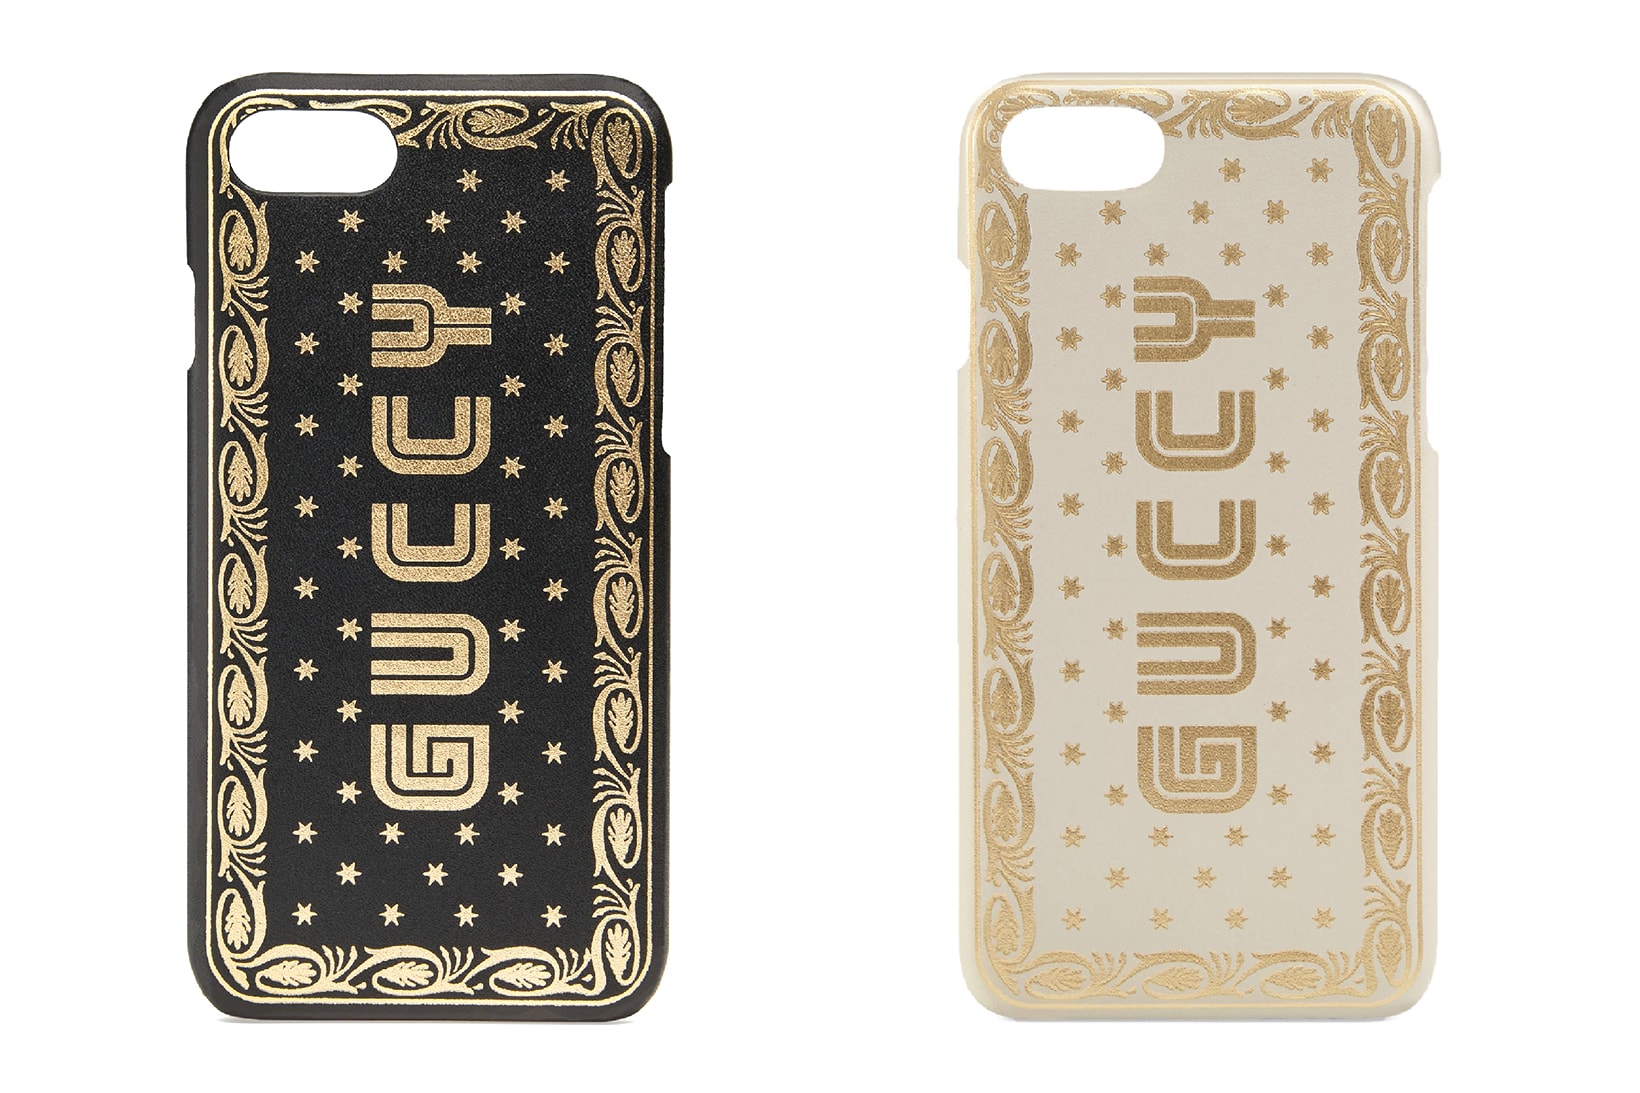 Gucci Bootleg GUCCY iPhone 7 Cases Phone case luxury black white sega inspired 80s retro where to buy